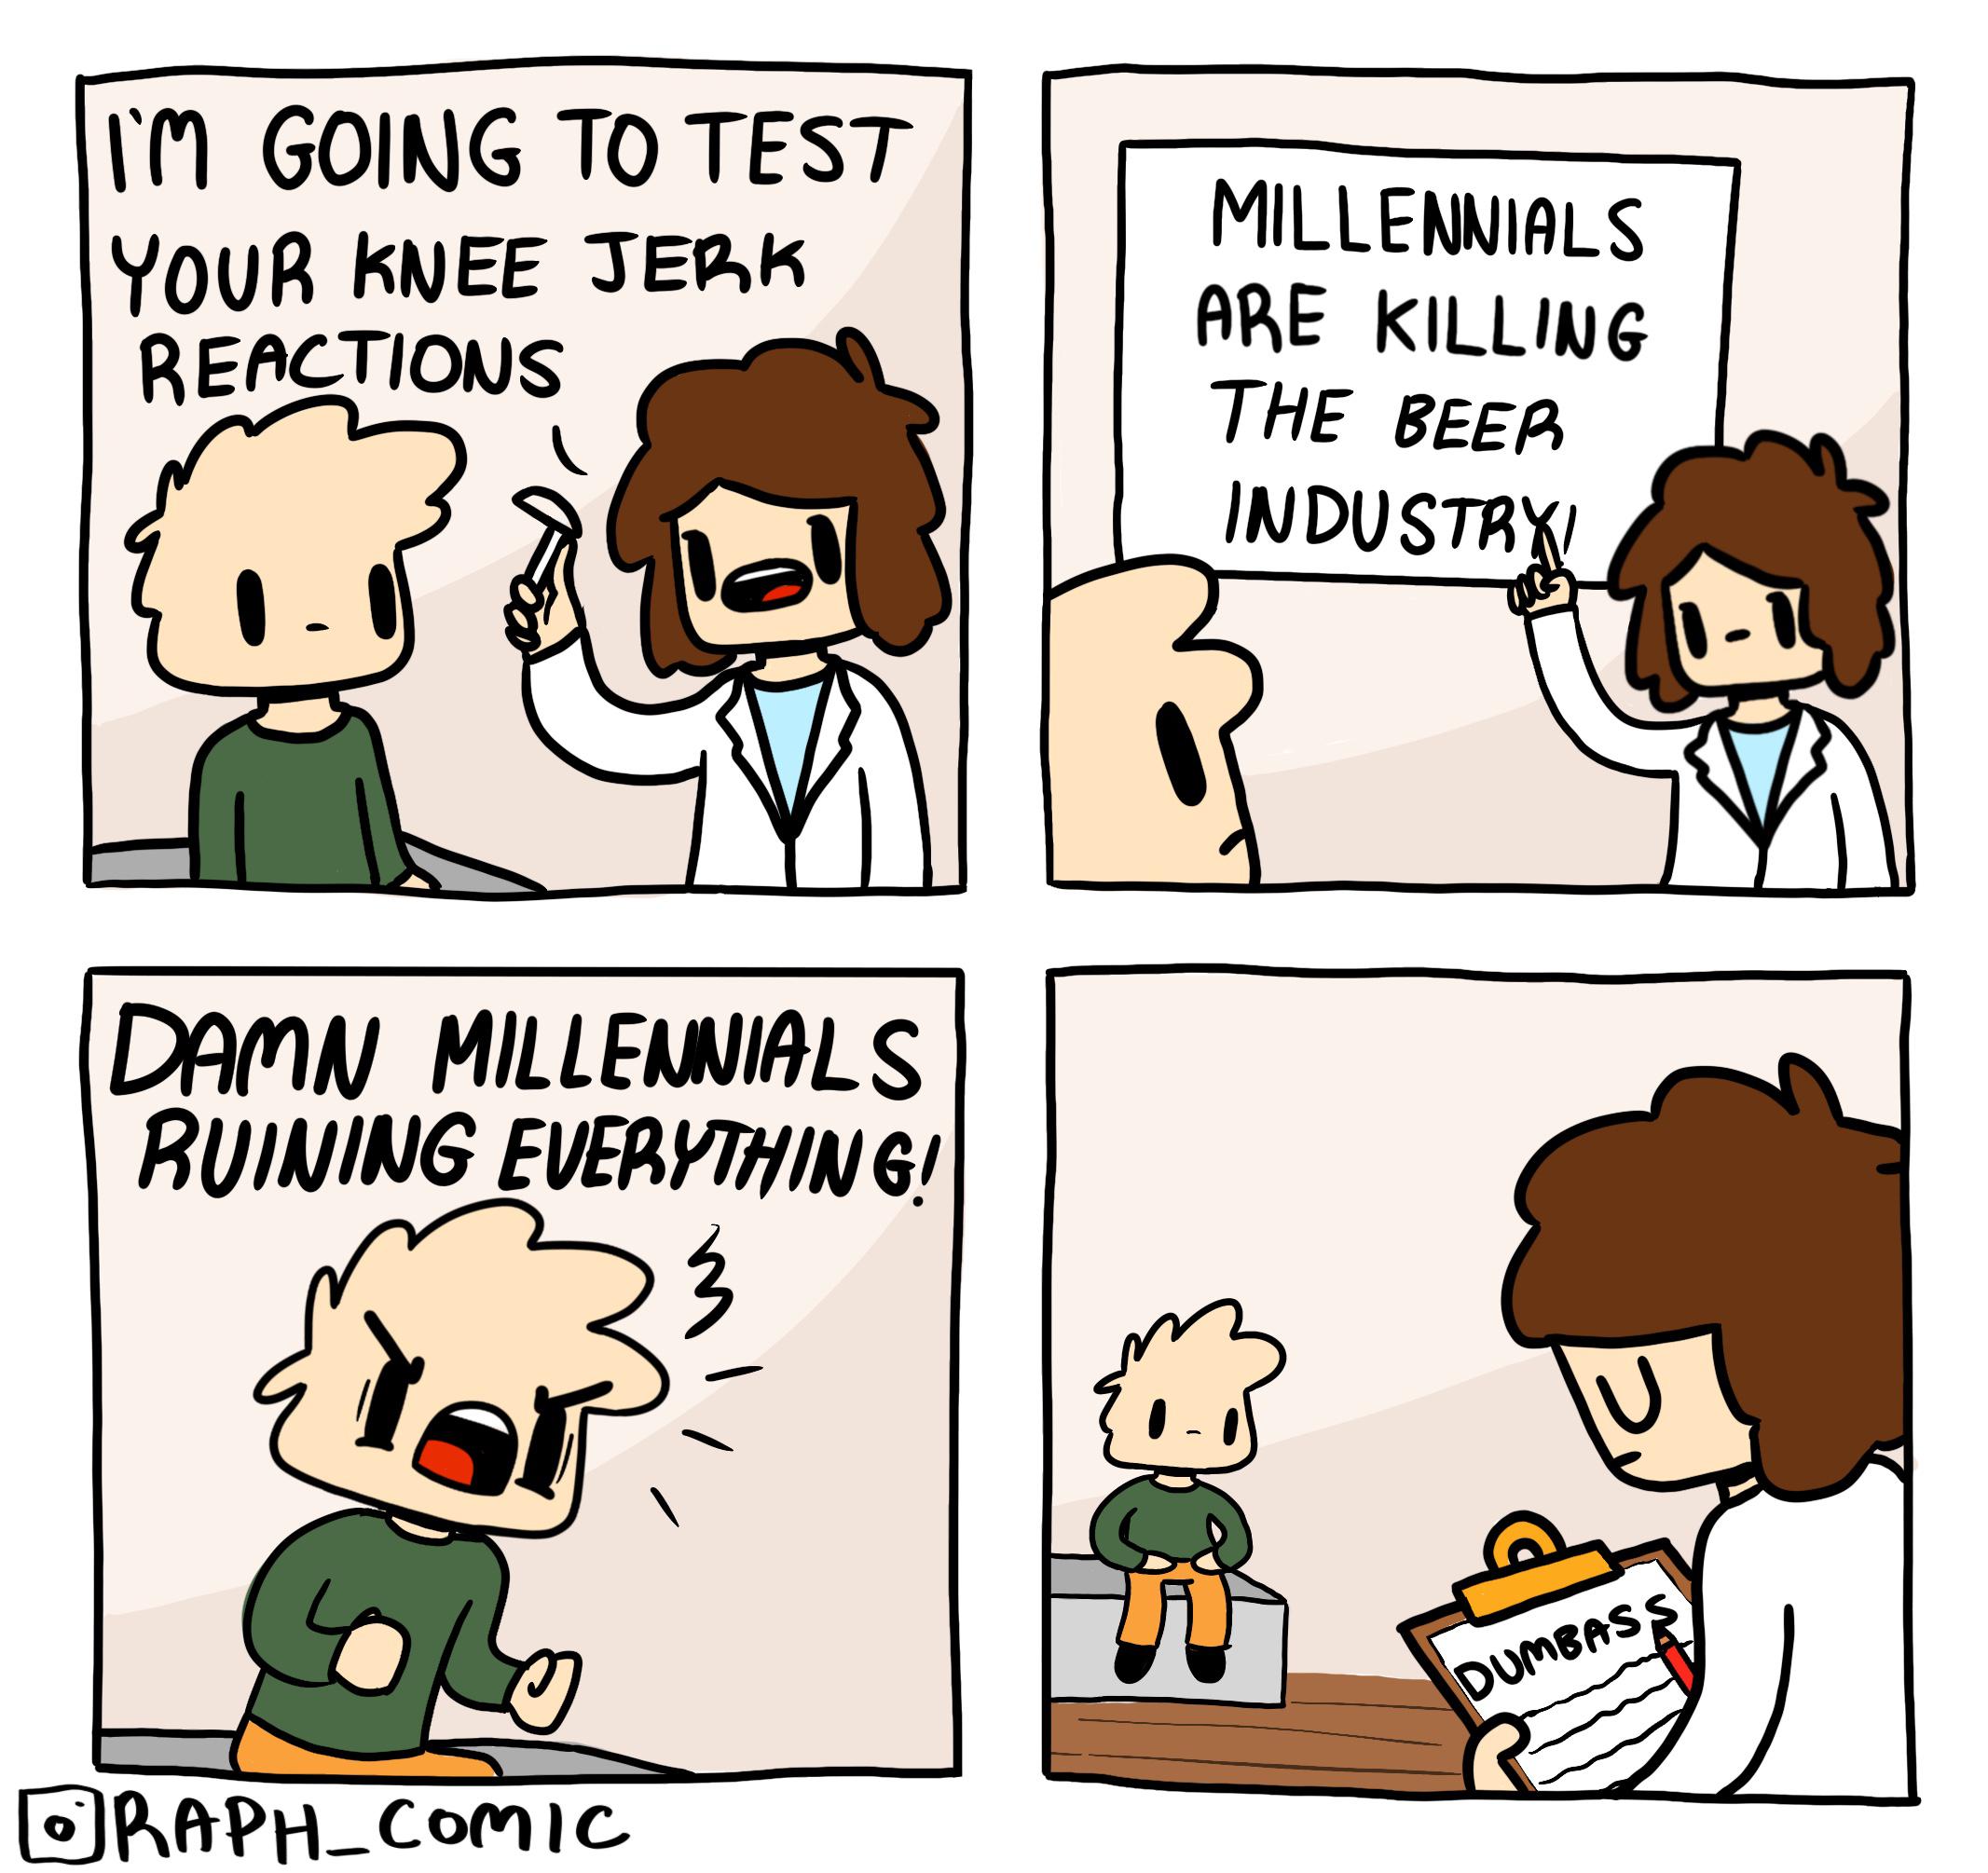 comics comics comics text: GOING TO TEST YOUR KNEE REBCTIOUS MILLERW19LS RUINING EVERYTHING! MILLENN19LS KILLING THE BEER INDUSTR I 